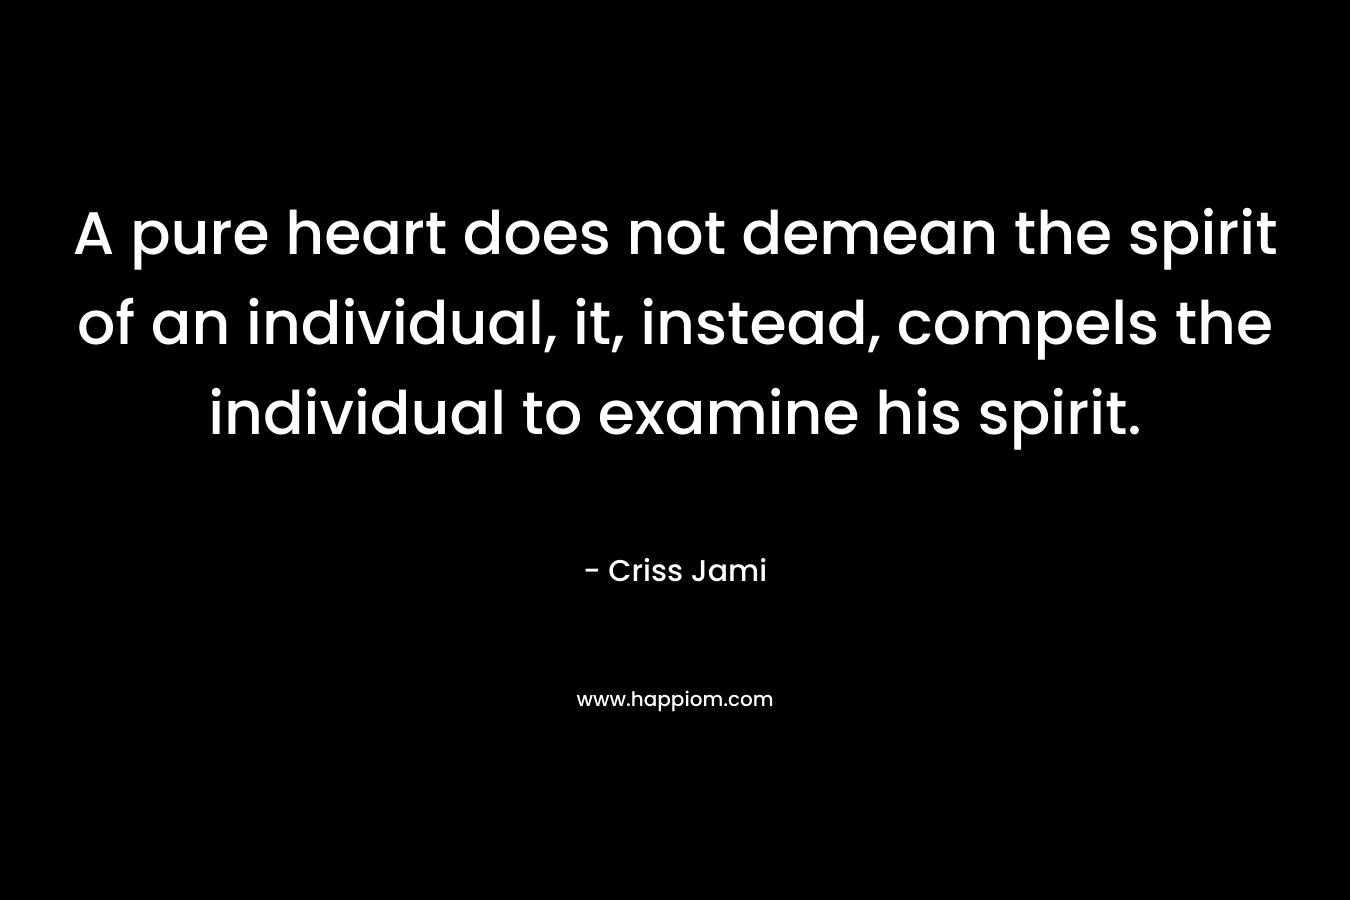 A pure heart does not demean the spirit of an individual, it, instead, compels the individual to examine his spirit.